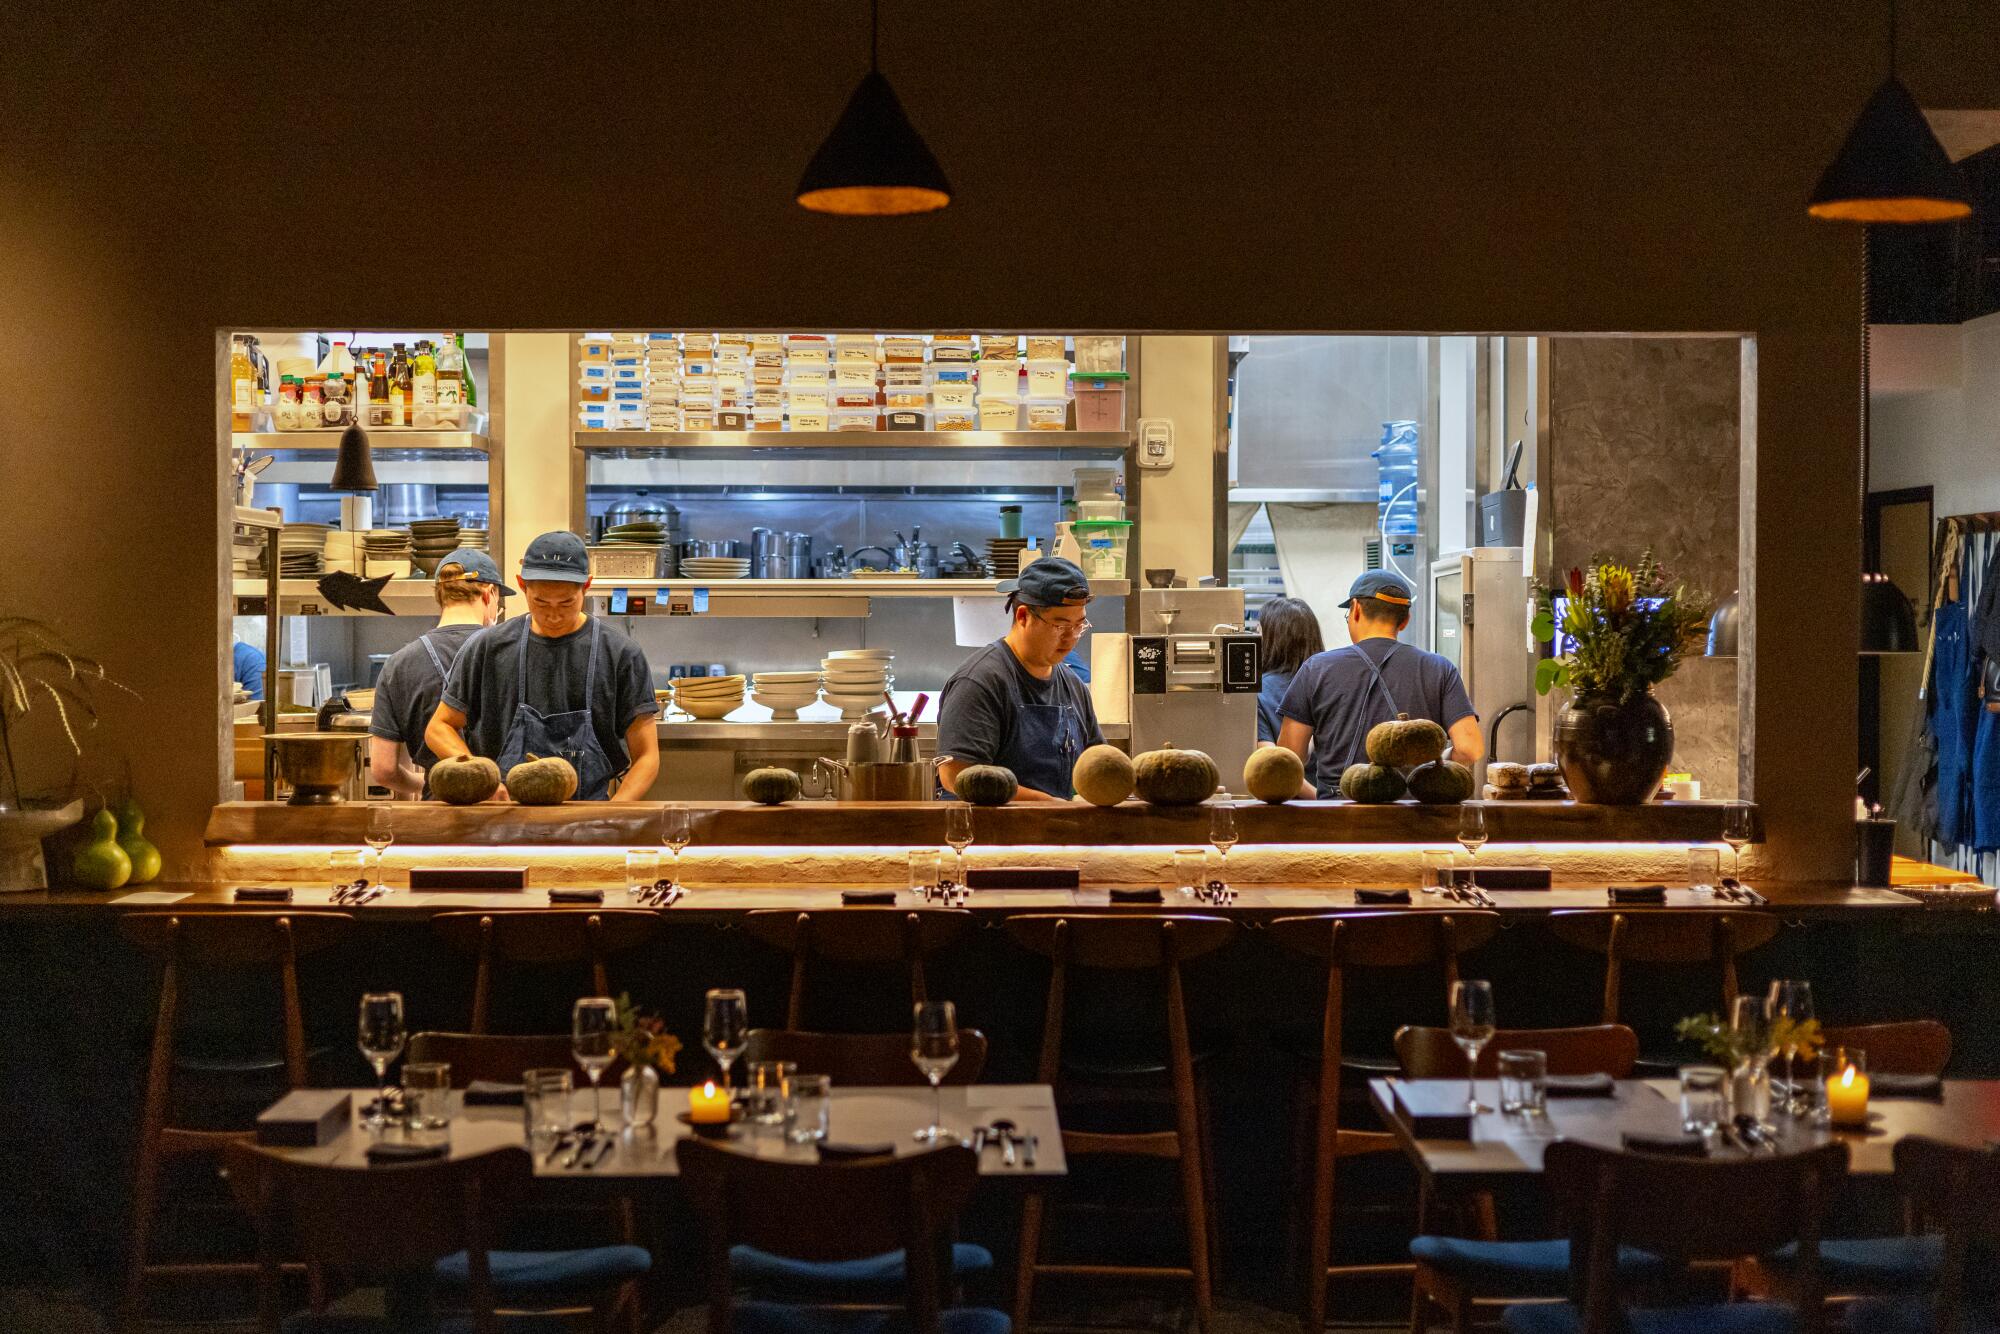 The open bar at Baroo gives diners a glance into the bustling kitchen.